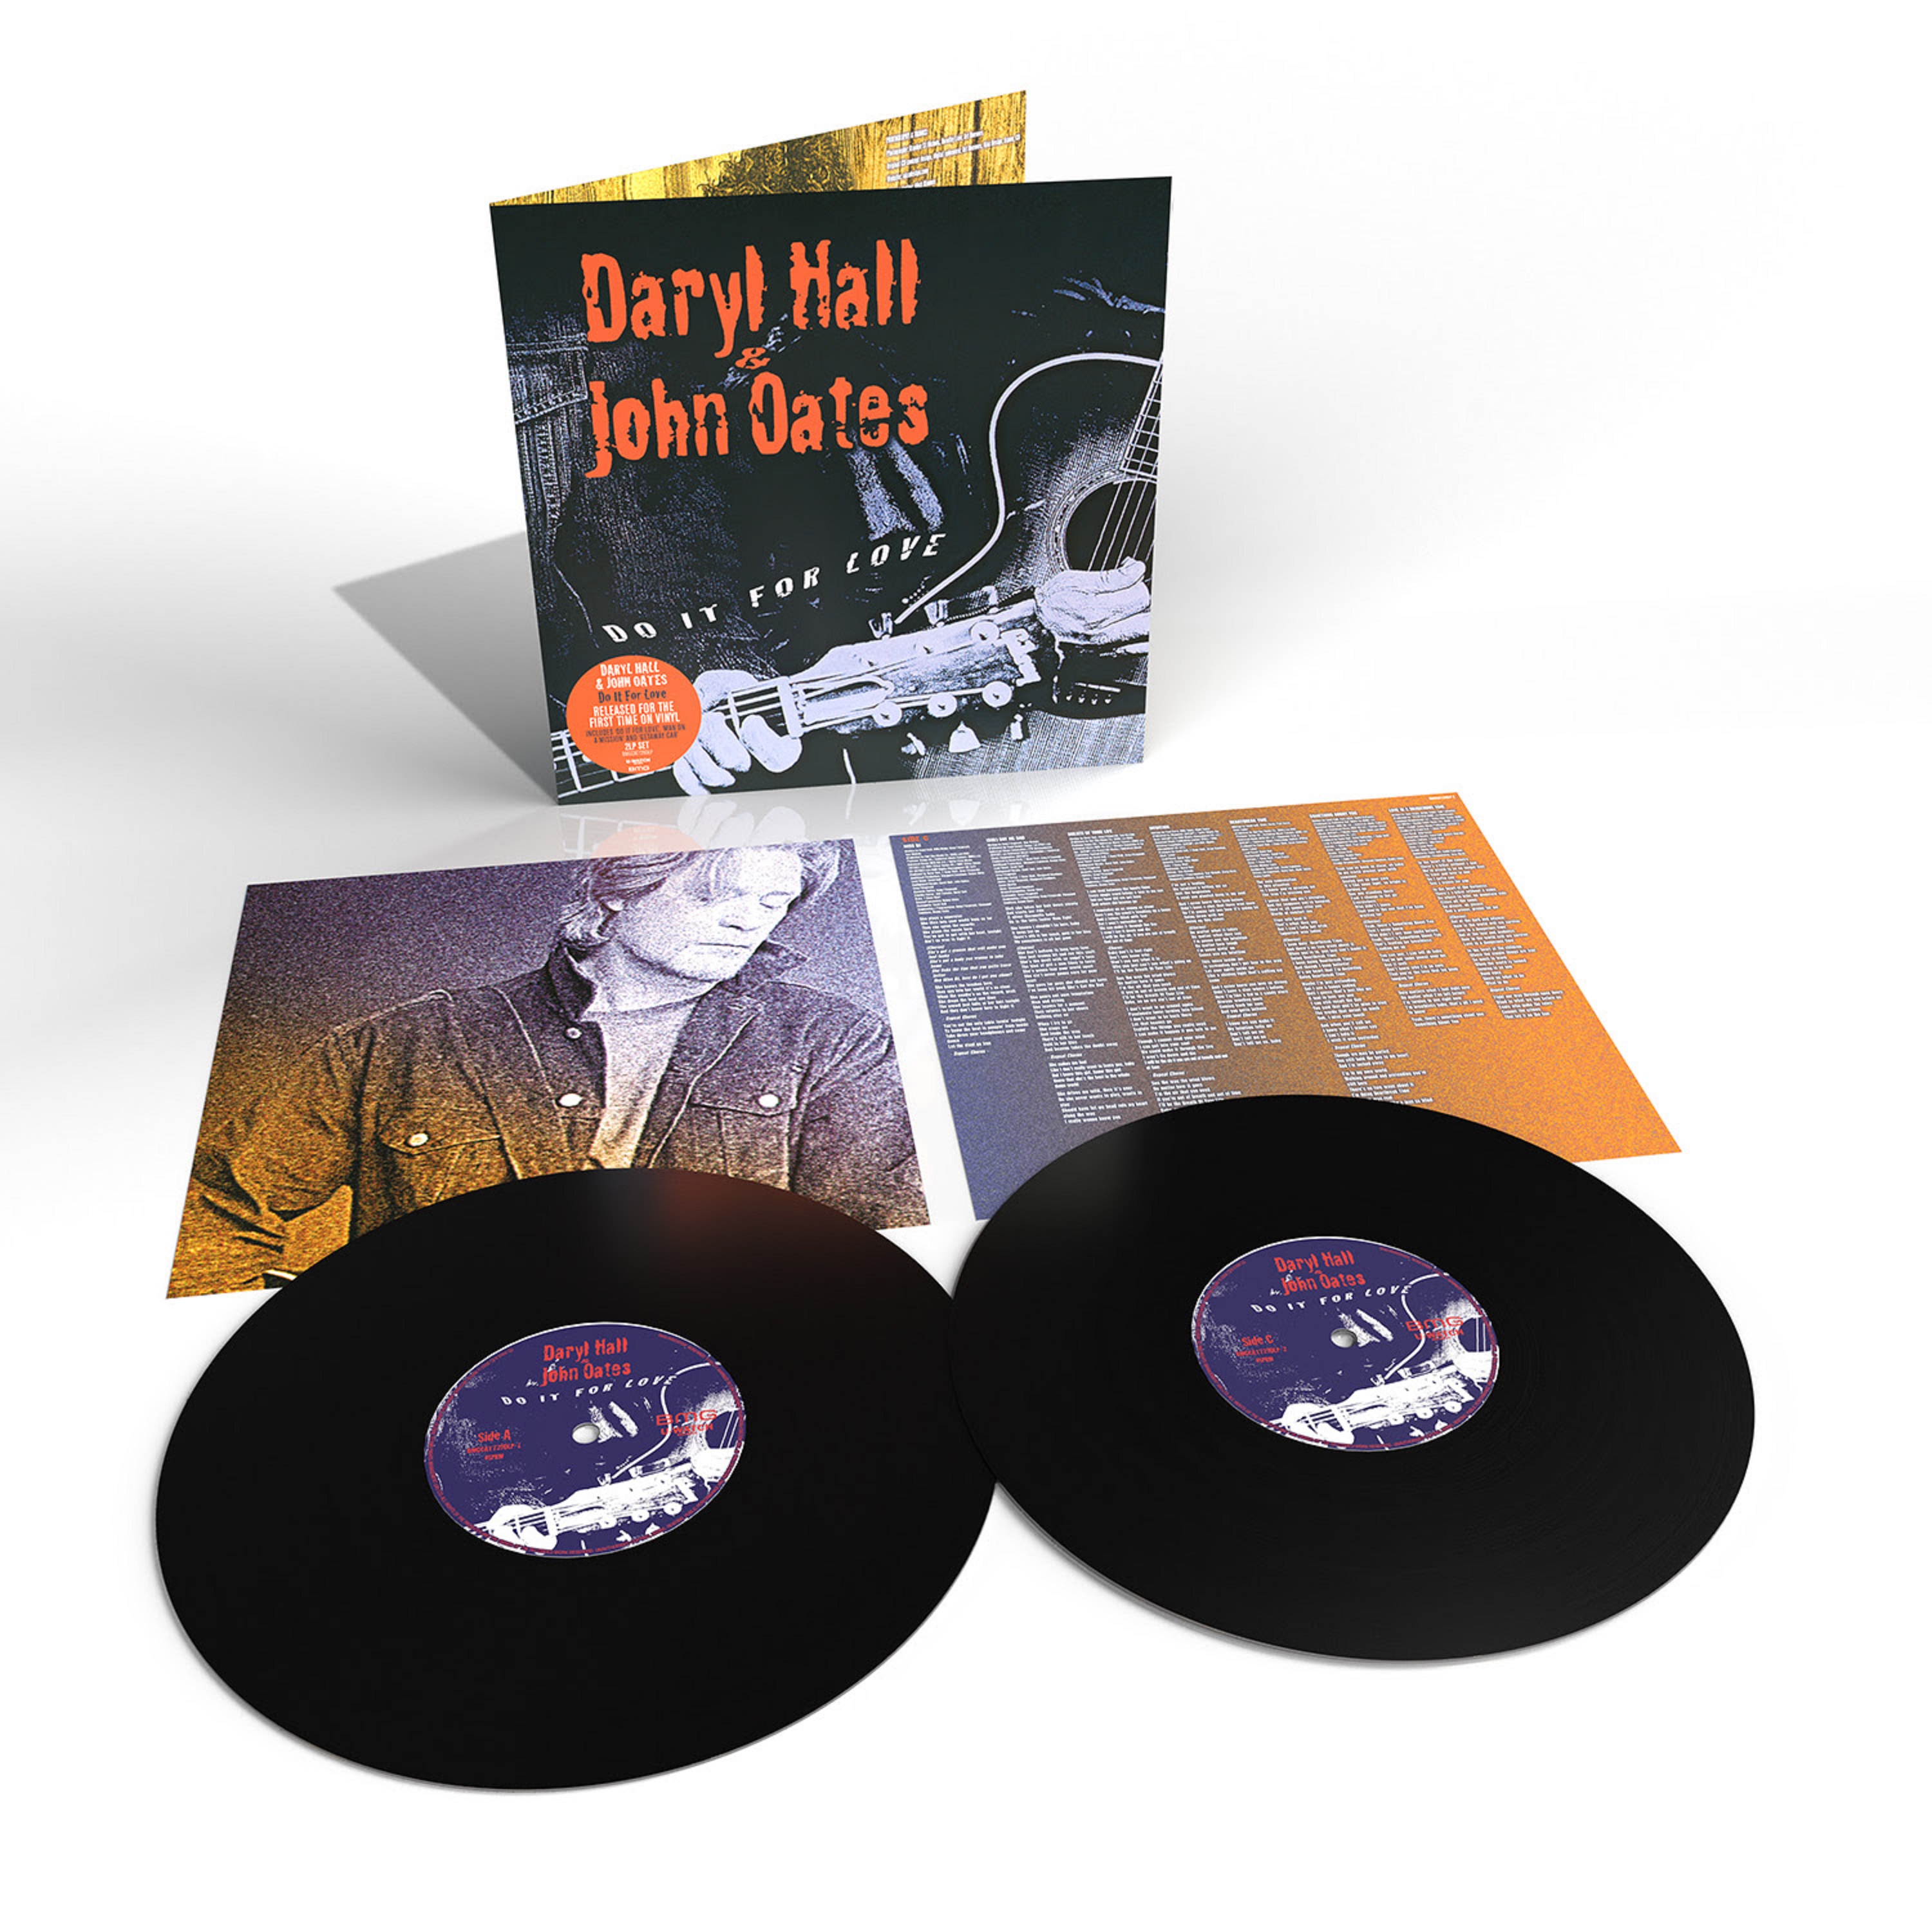 Out Now ~ Daryl Hall And John Oates ~ Do It For Love Reissued On Vinyl For The First Time